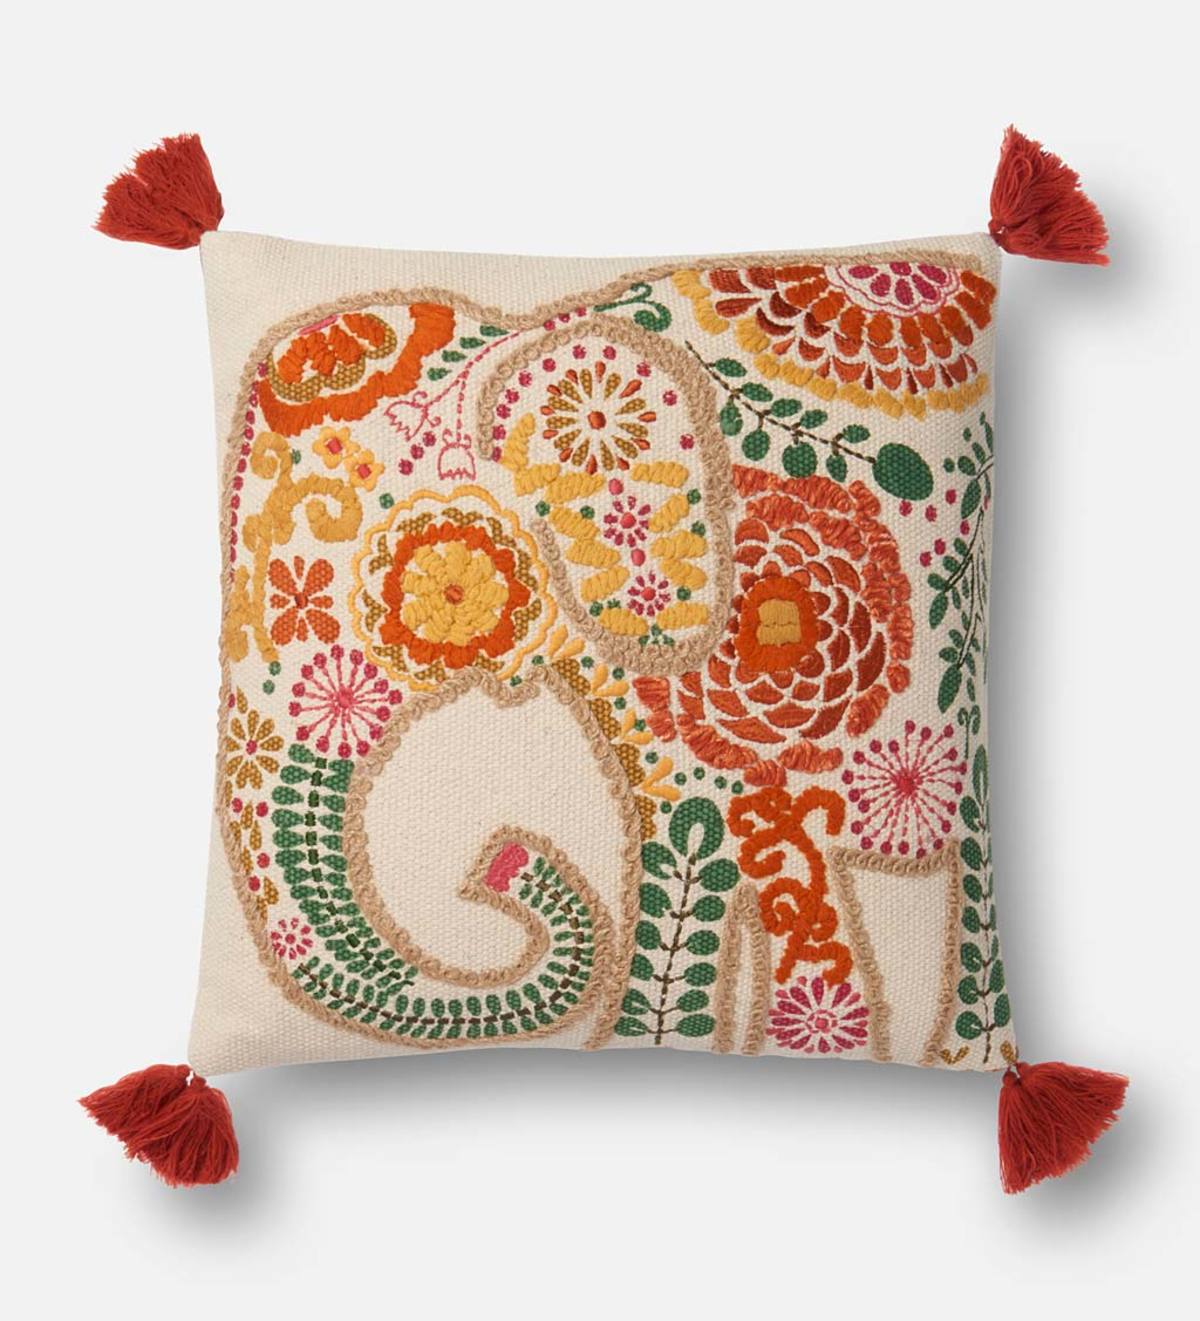 Floral Elephant Throw Pillow with Tassels